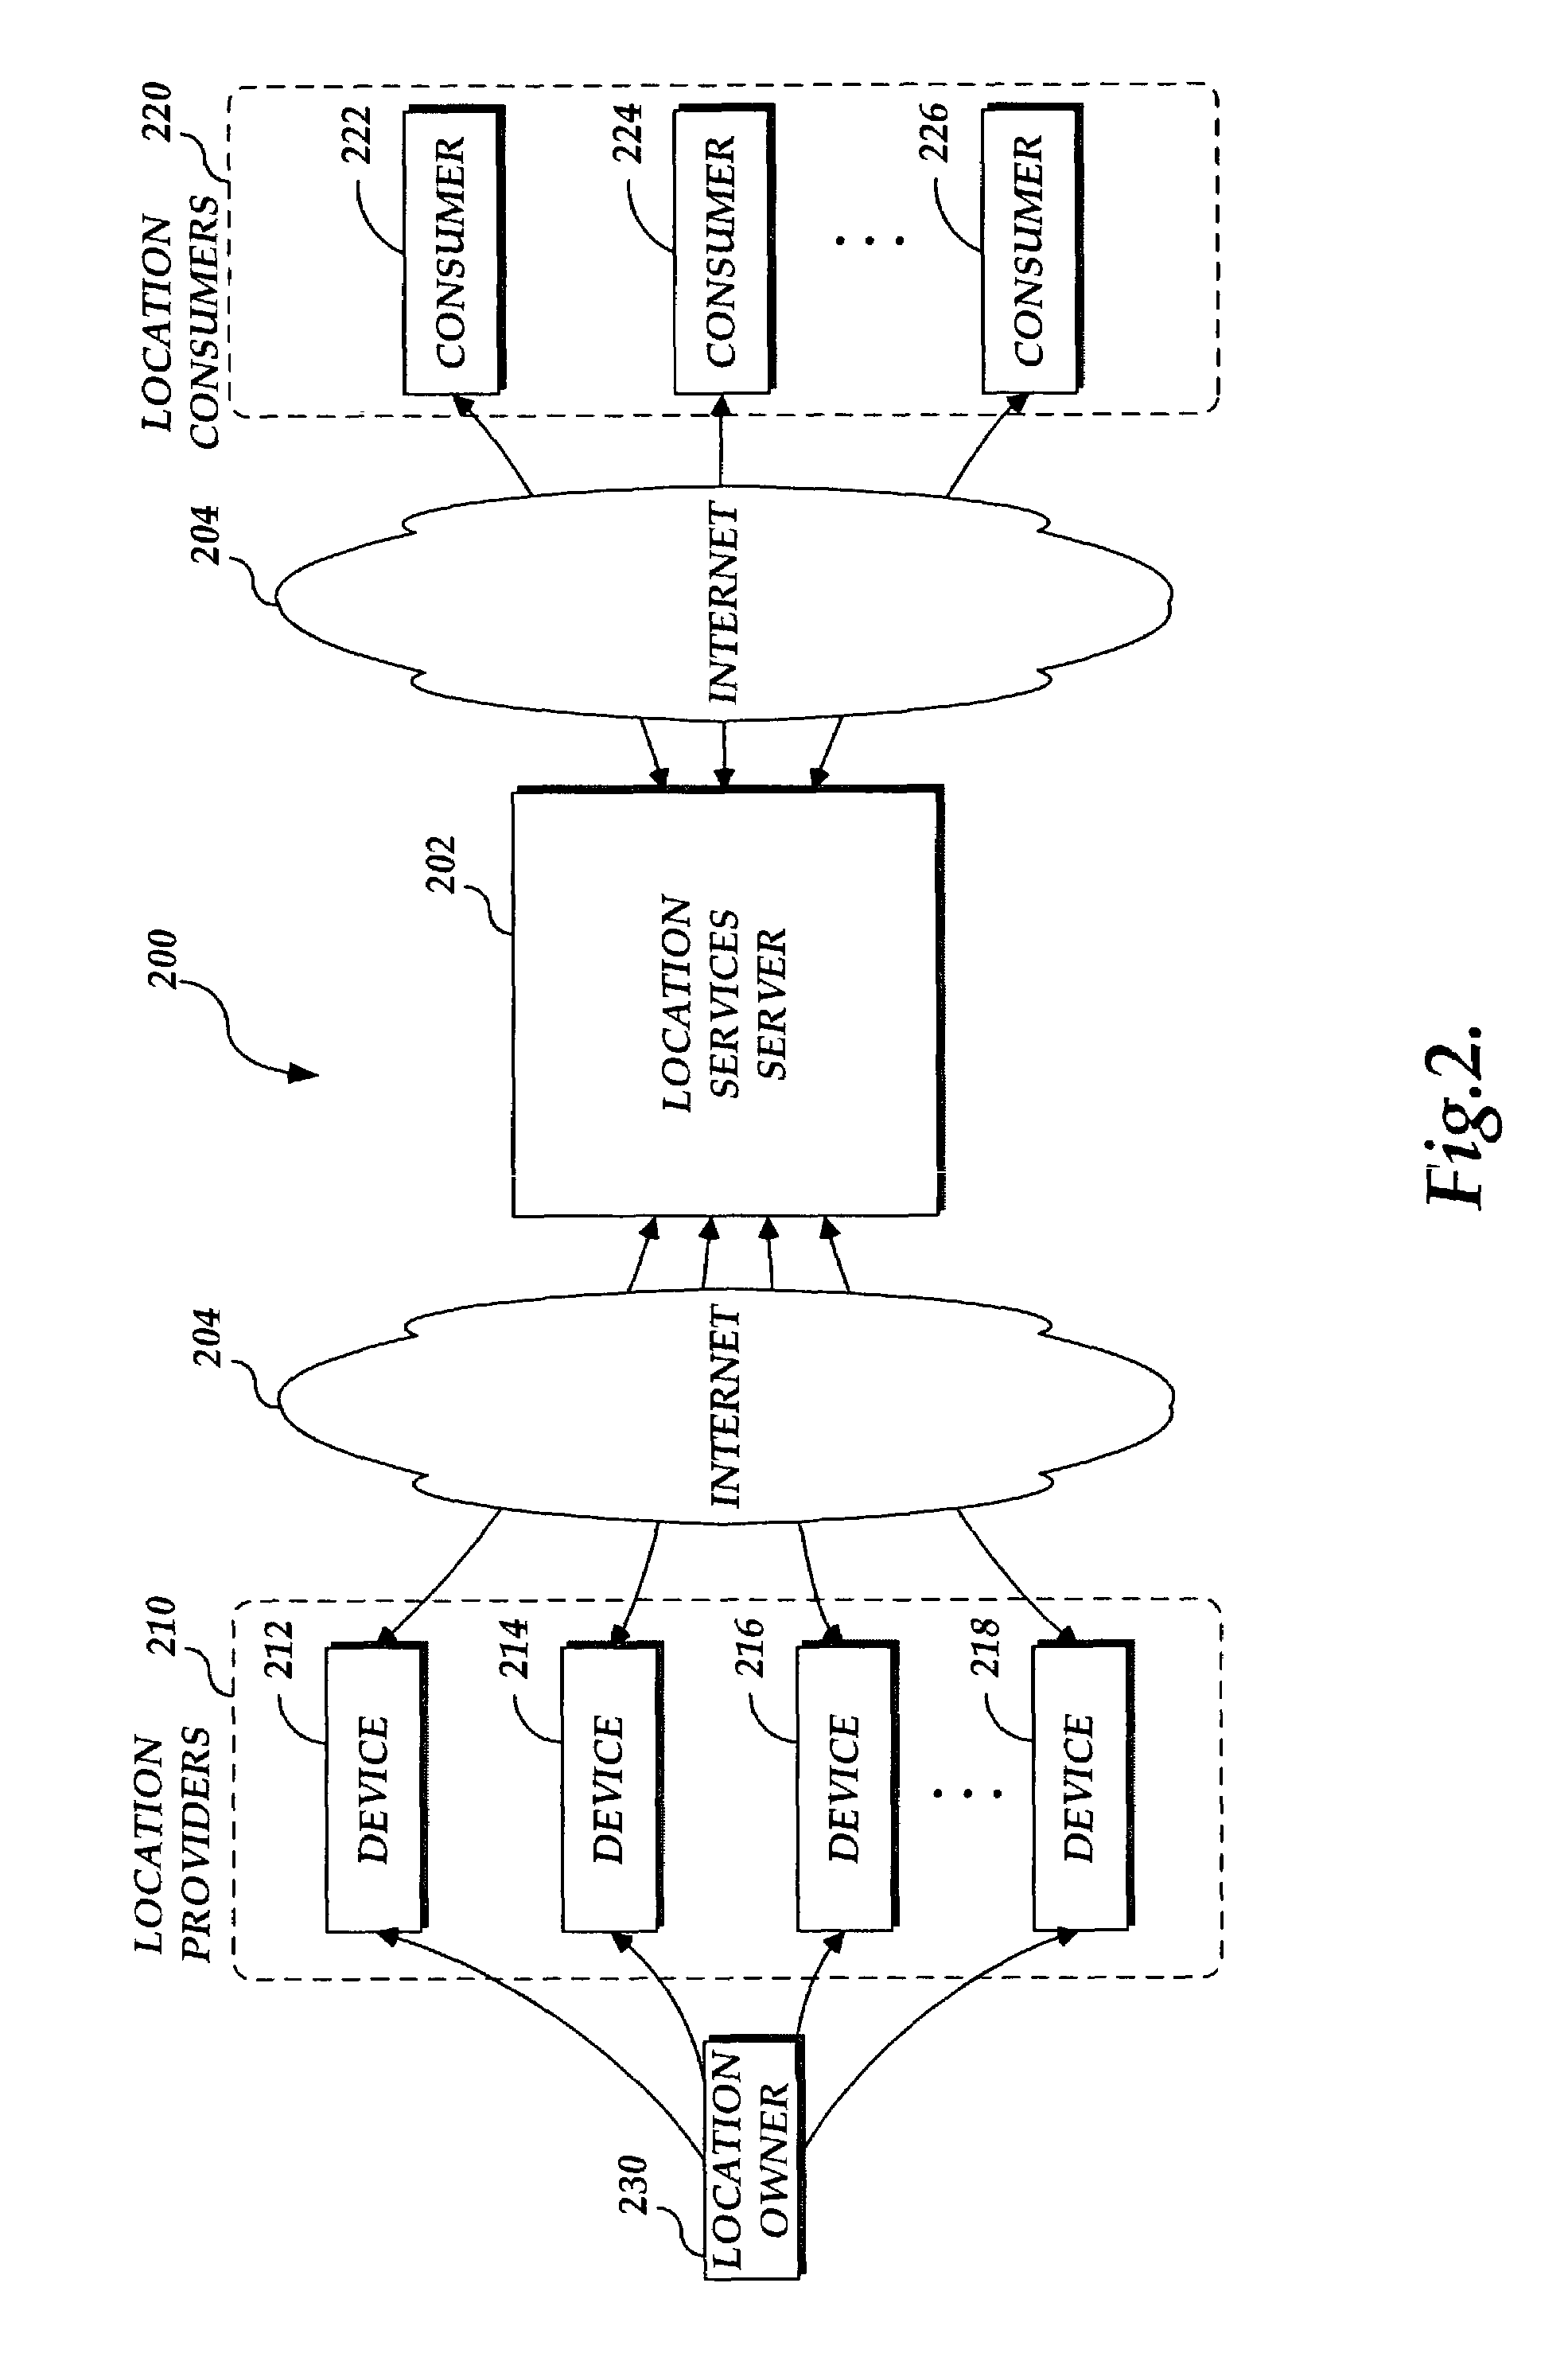 System and method for controlling access to location information